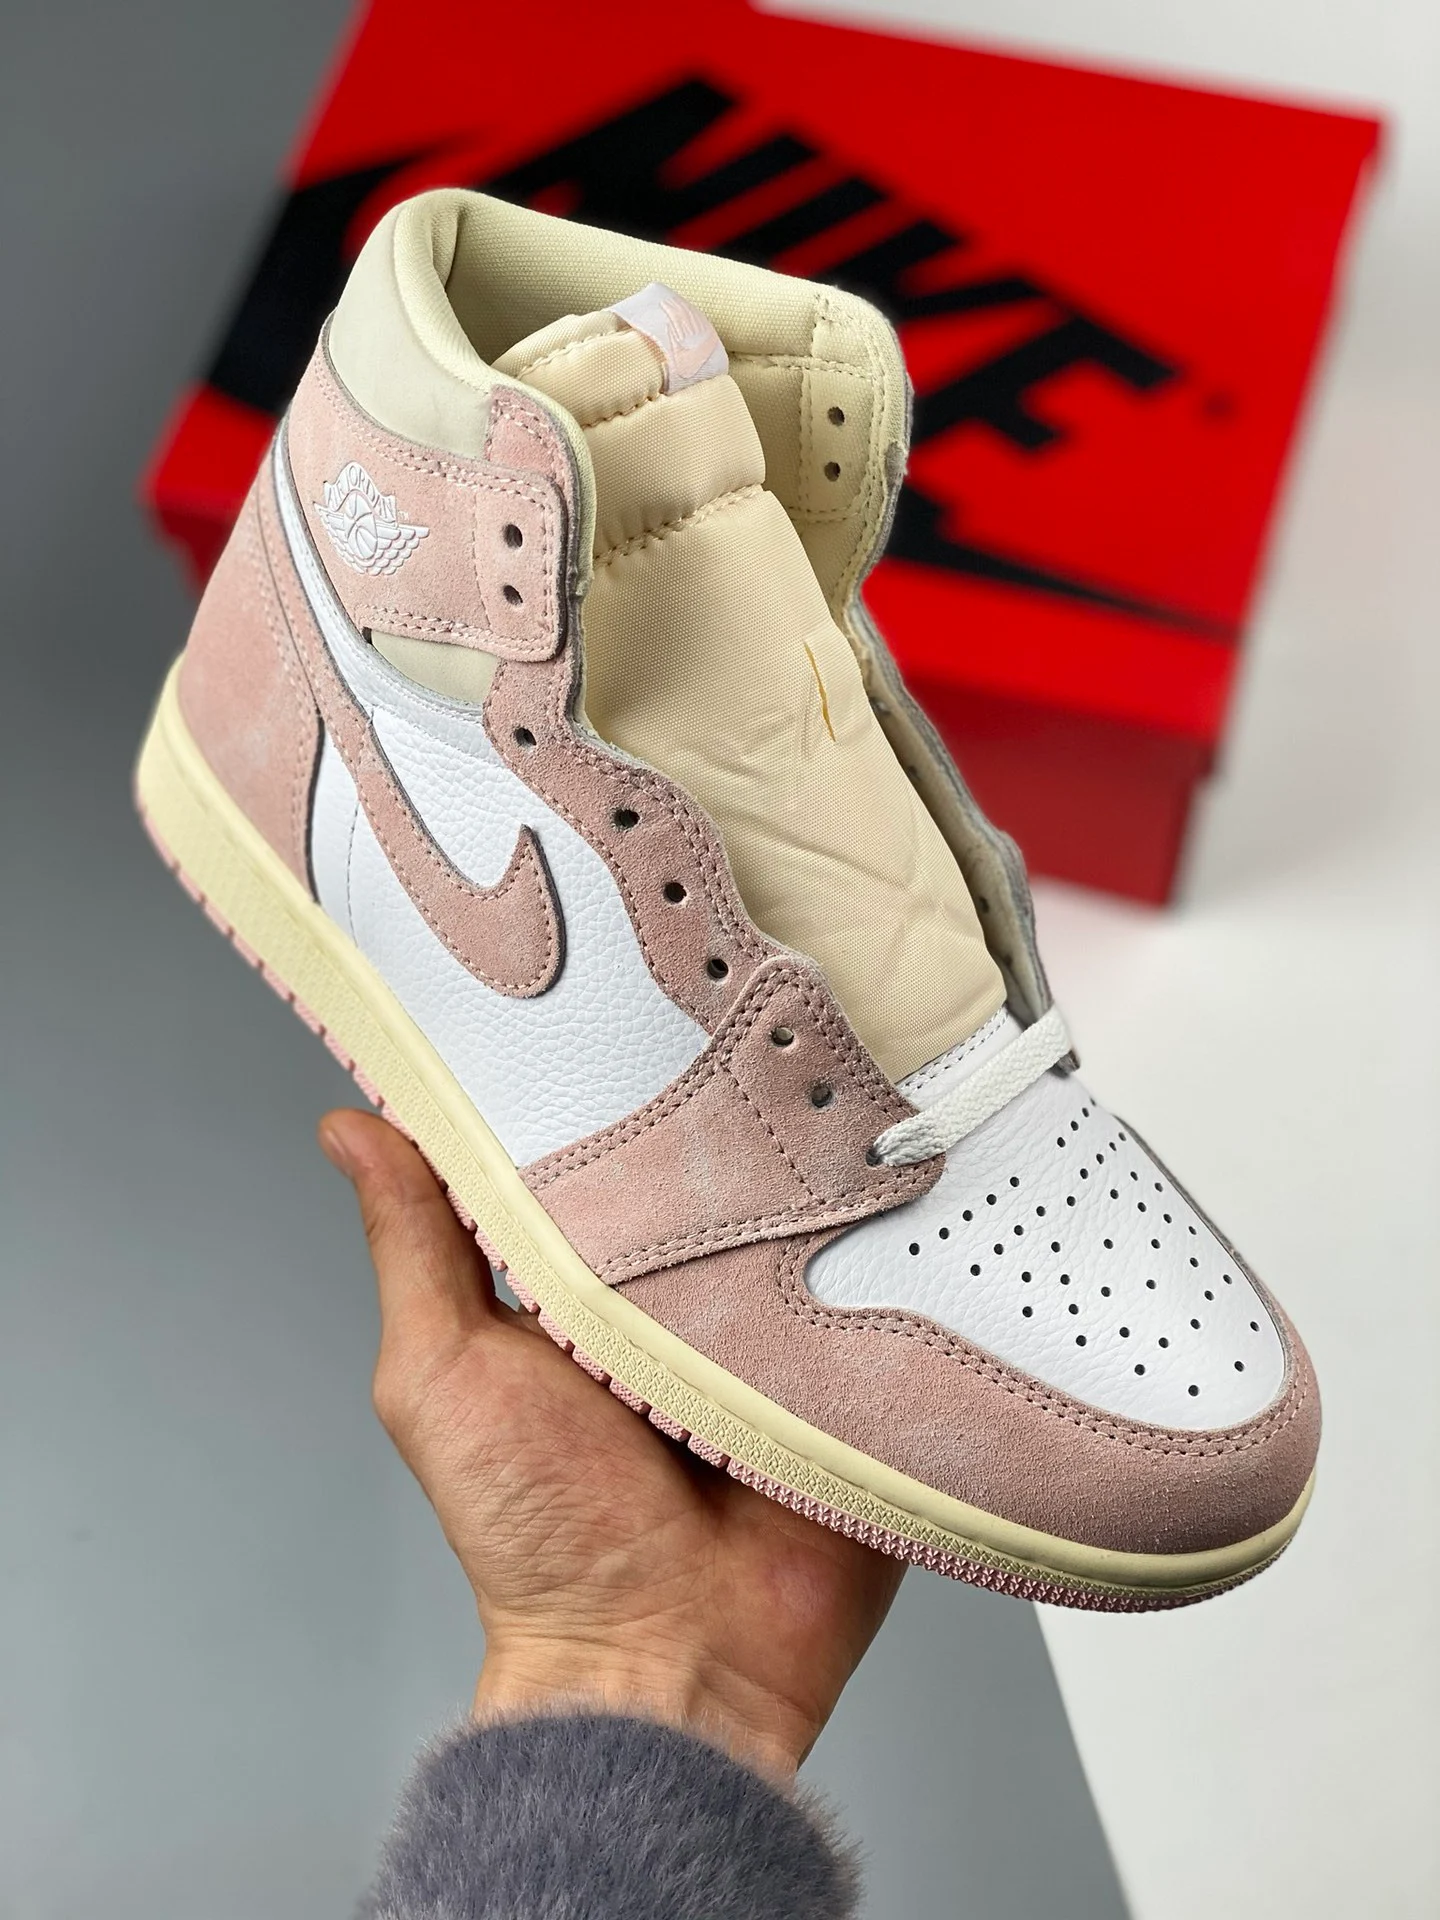 Air Jordan 1 High Washed Pink Atmosphere White Muslin Sail For Sale